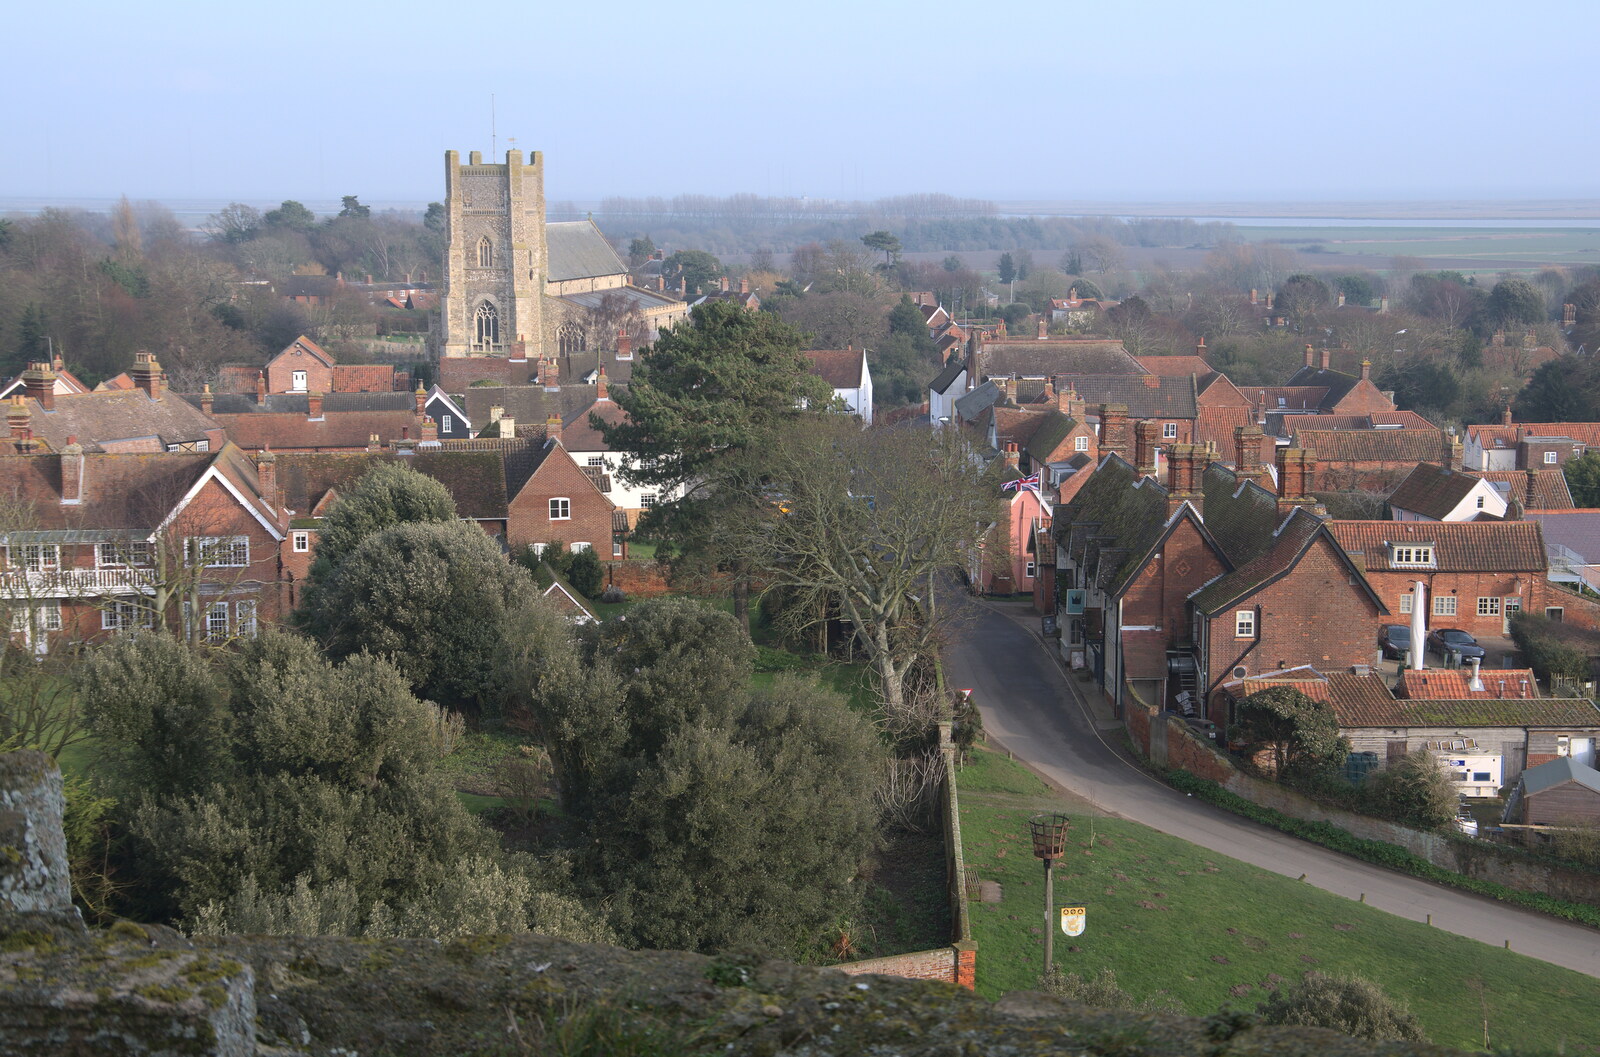 A Trip to Orford, Suffolk - 25th January 2020: Orford